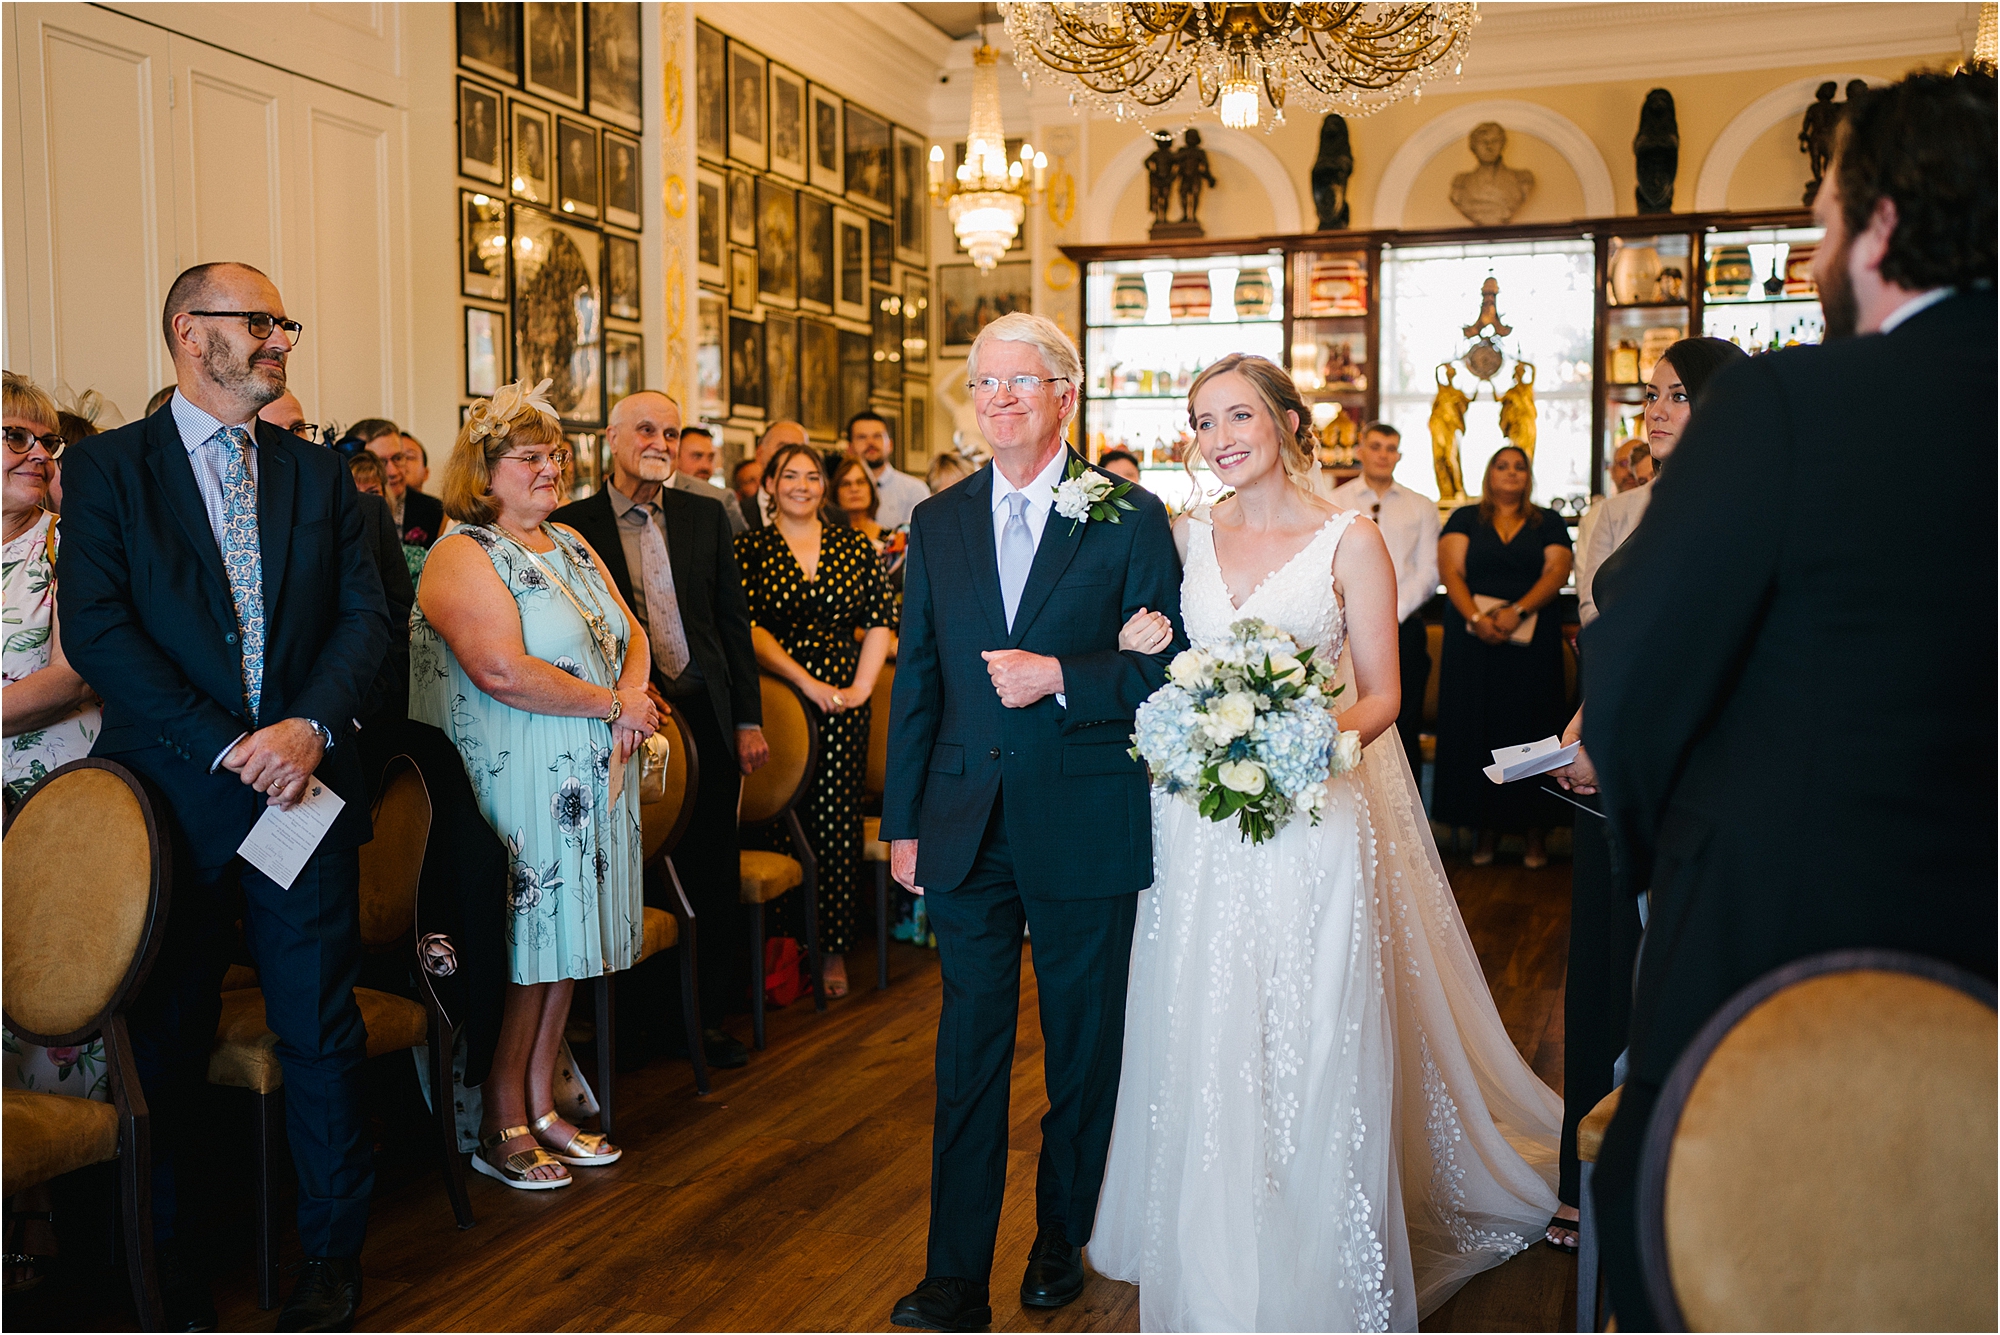 A bride walking down the aisle with her father at the Trafalgar Tavern Greenwich, London.